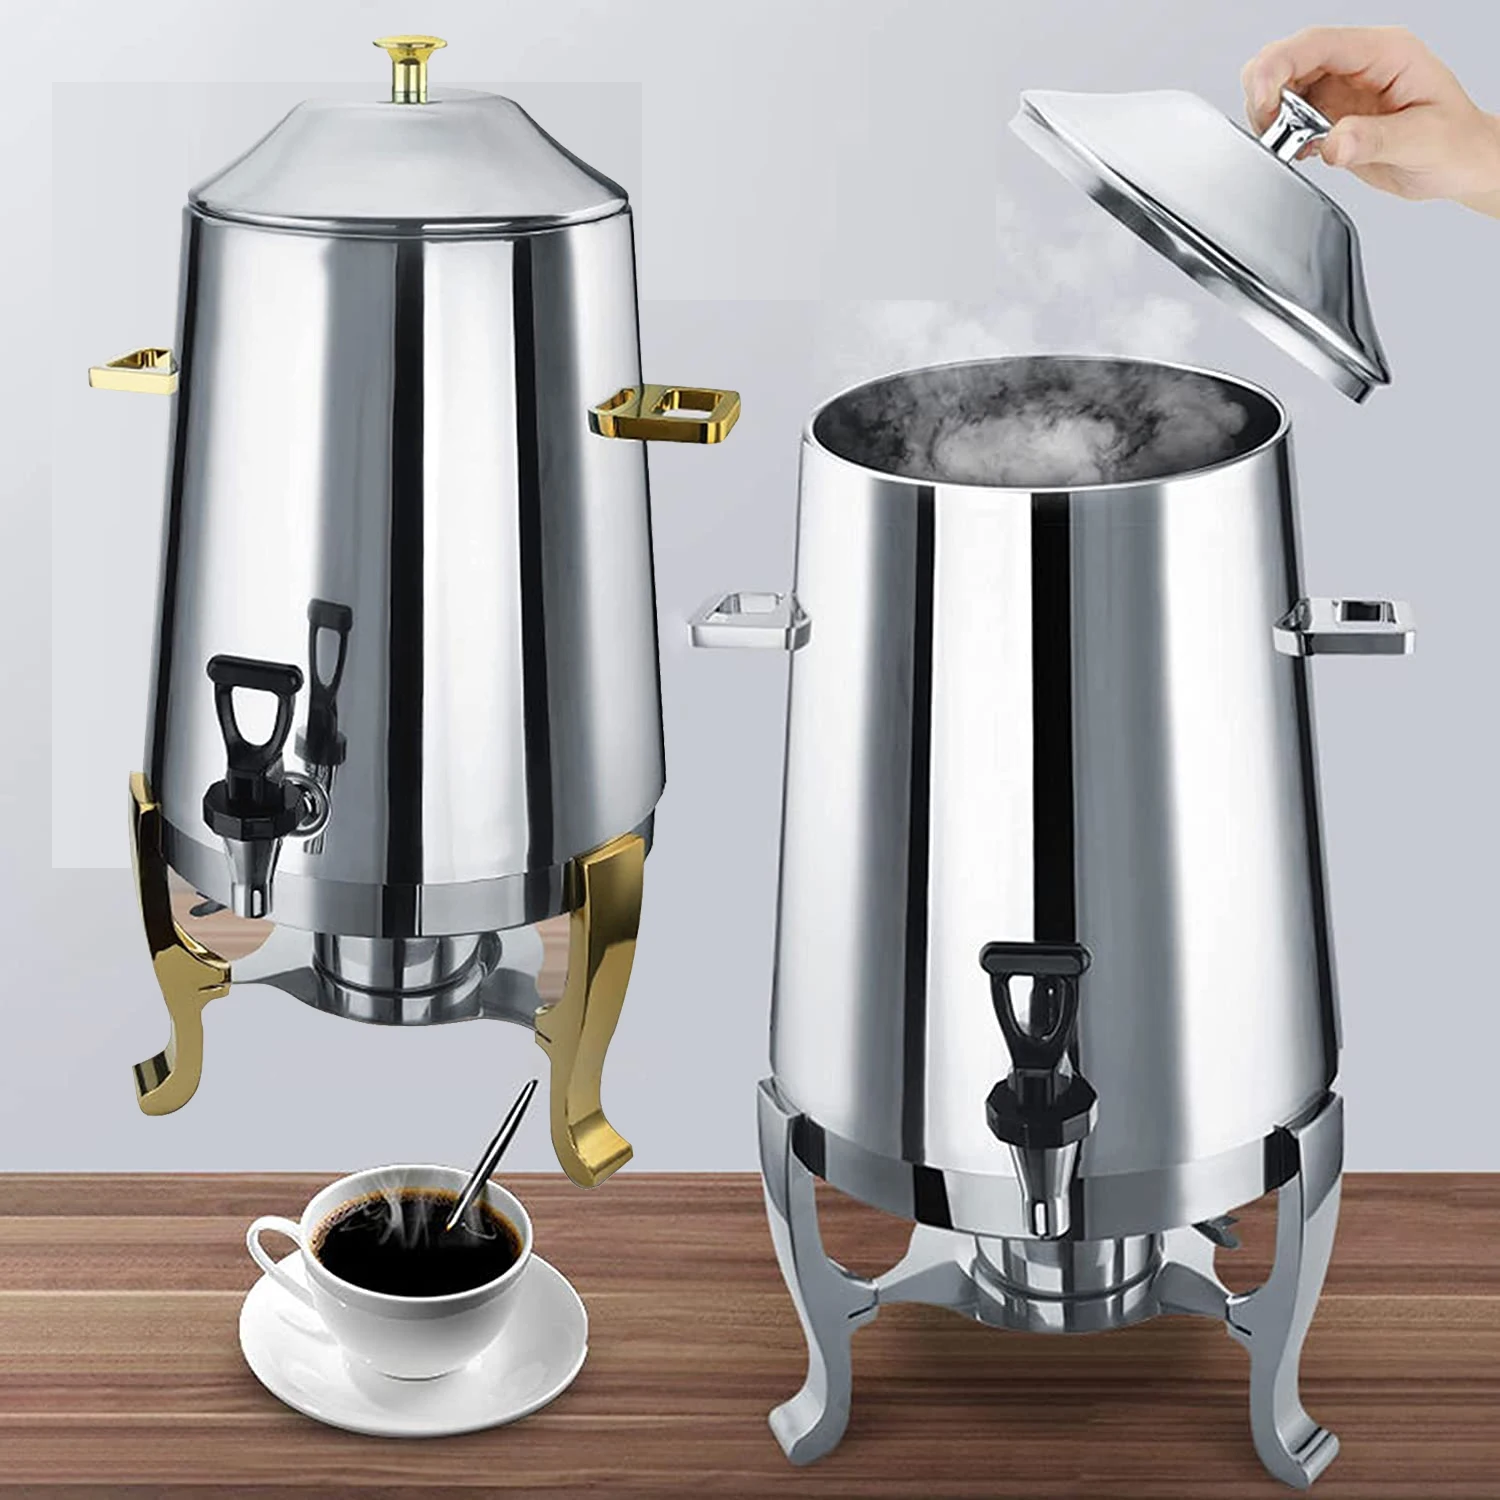 220V 13L drink warmer Stainless steel keep hot/cold coffee